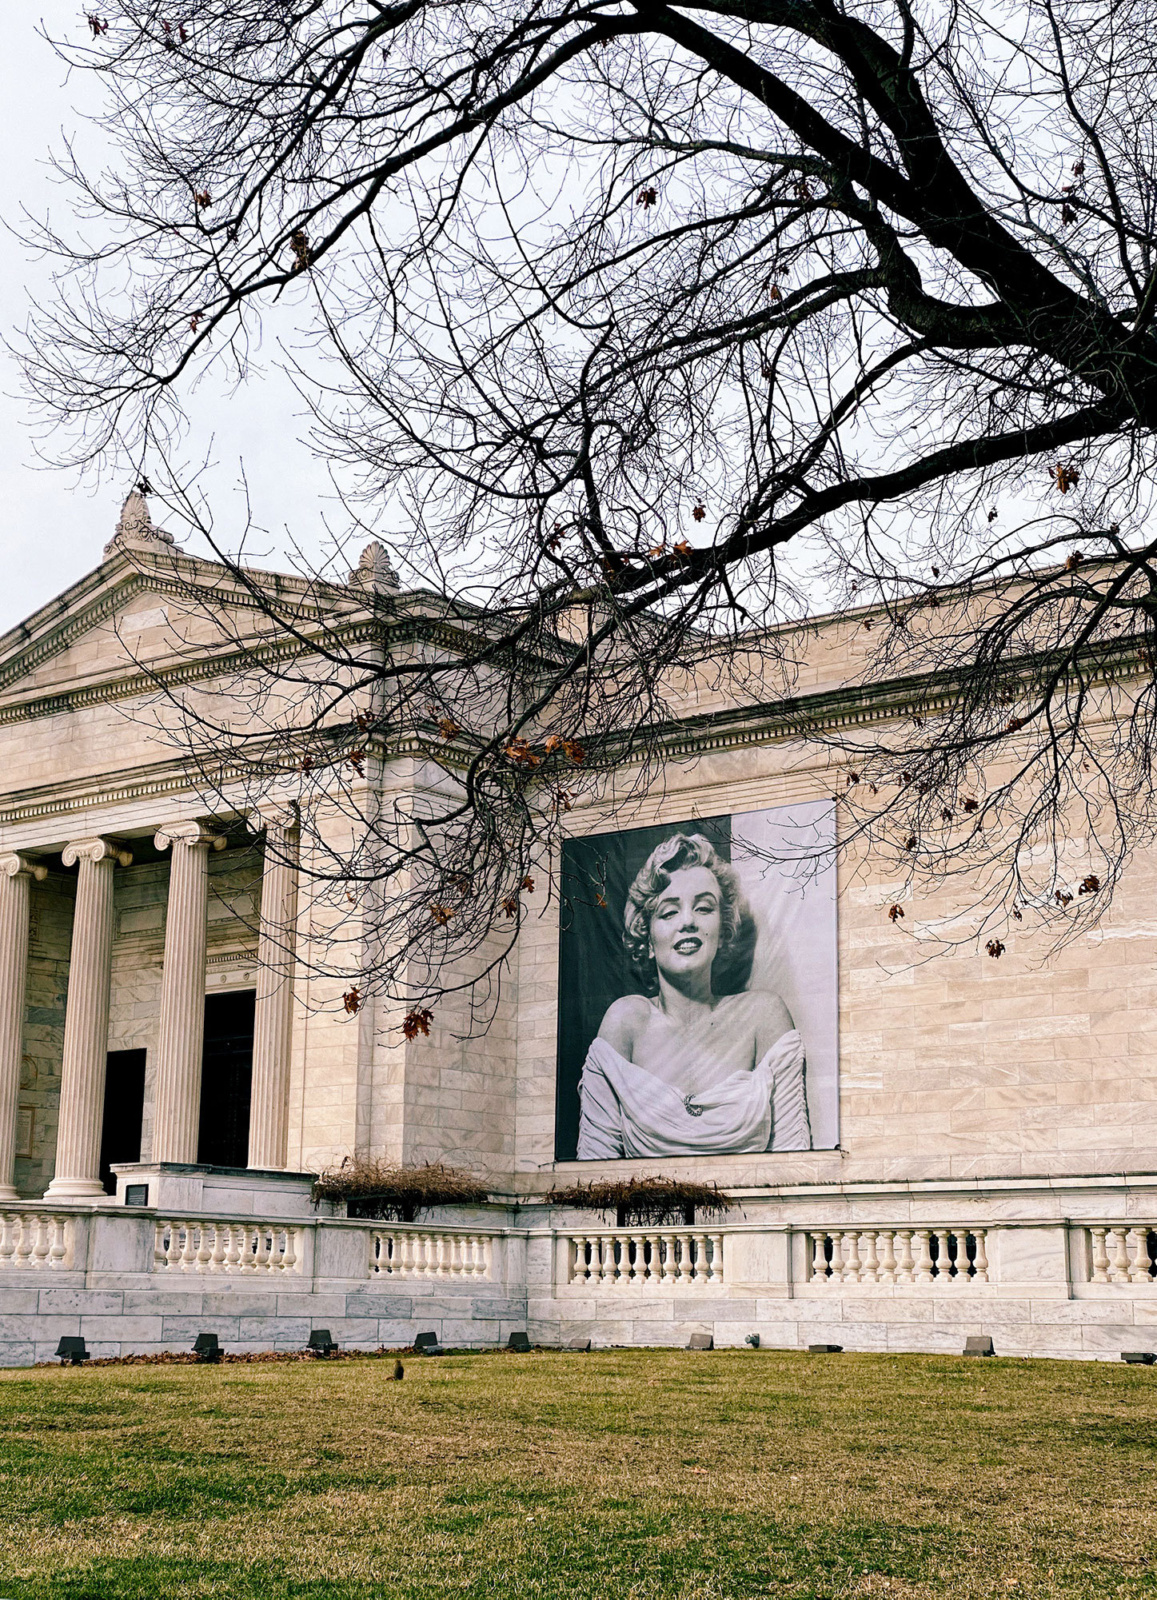 PROOF exhibition branding banners, featuring Marilyn Monroe, on the Cleveland Museum of Art